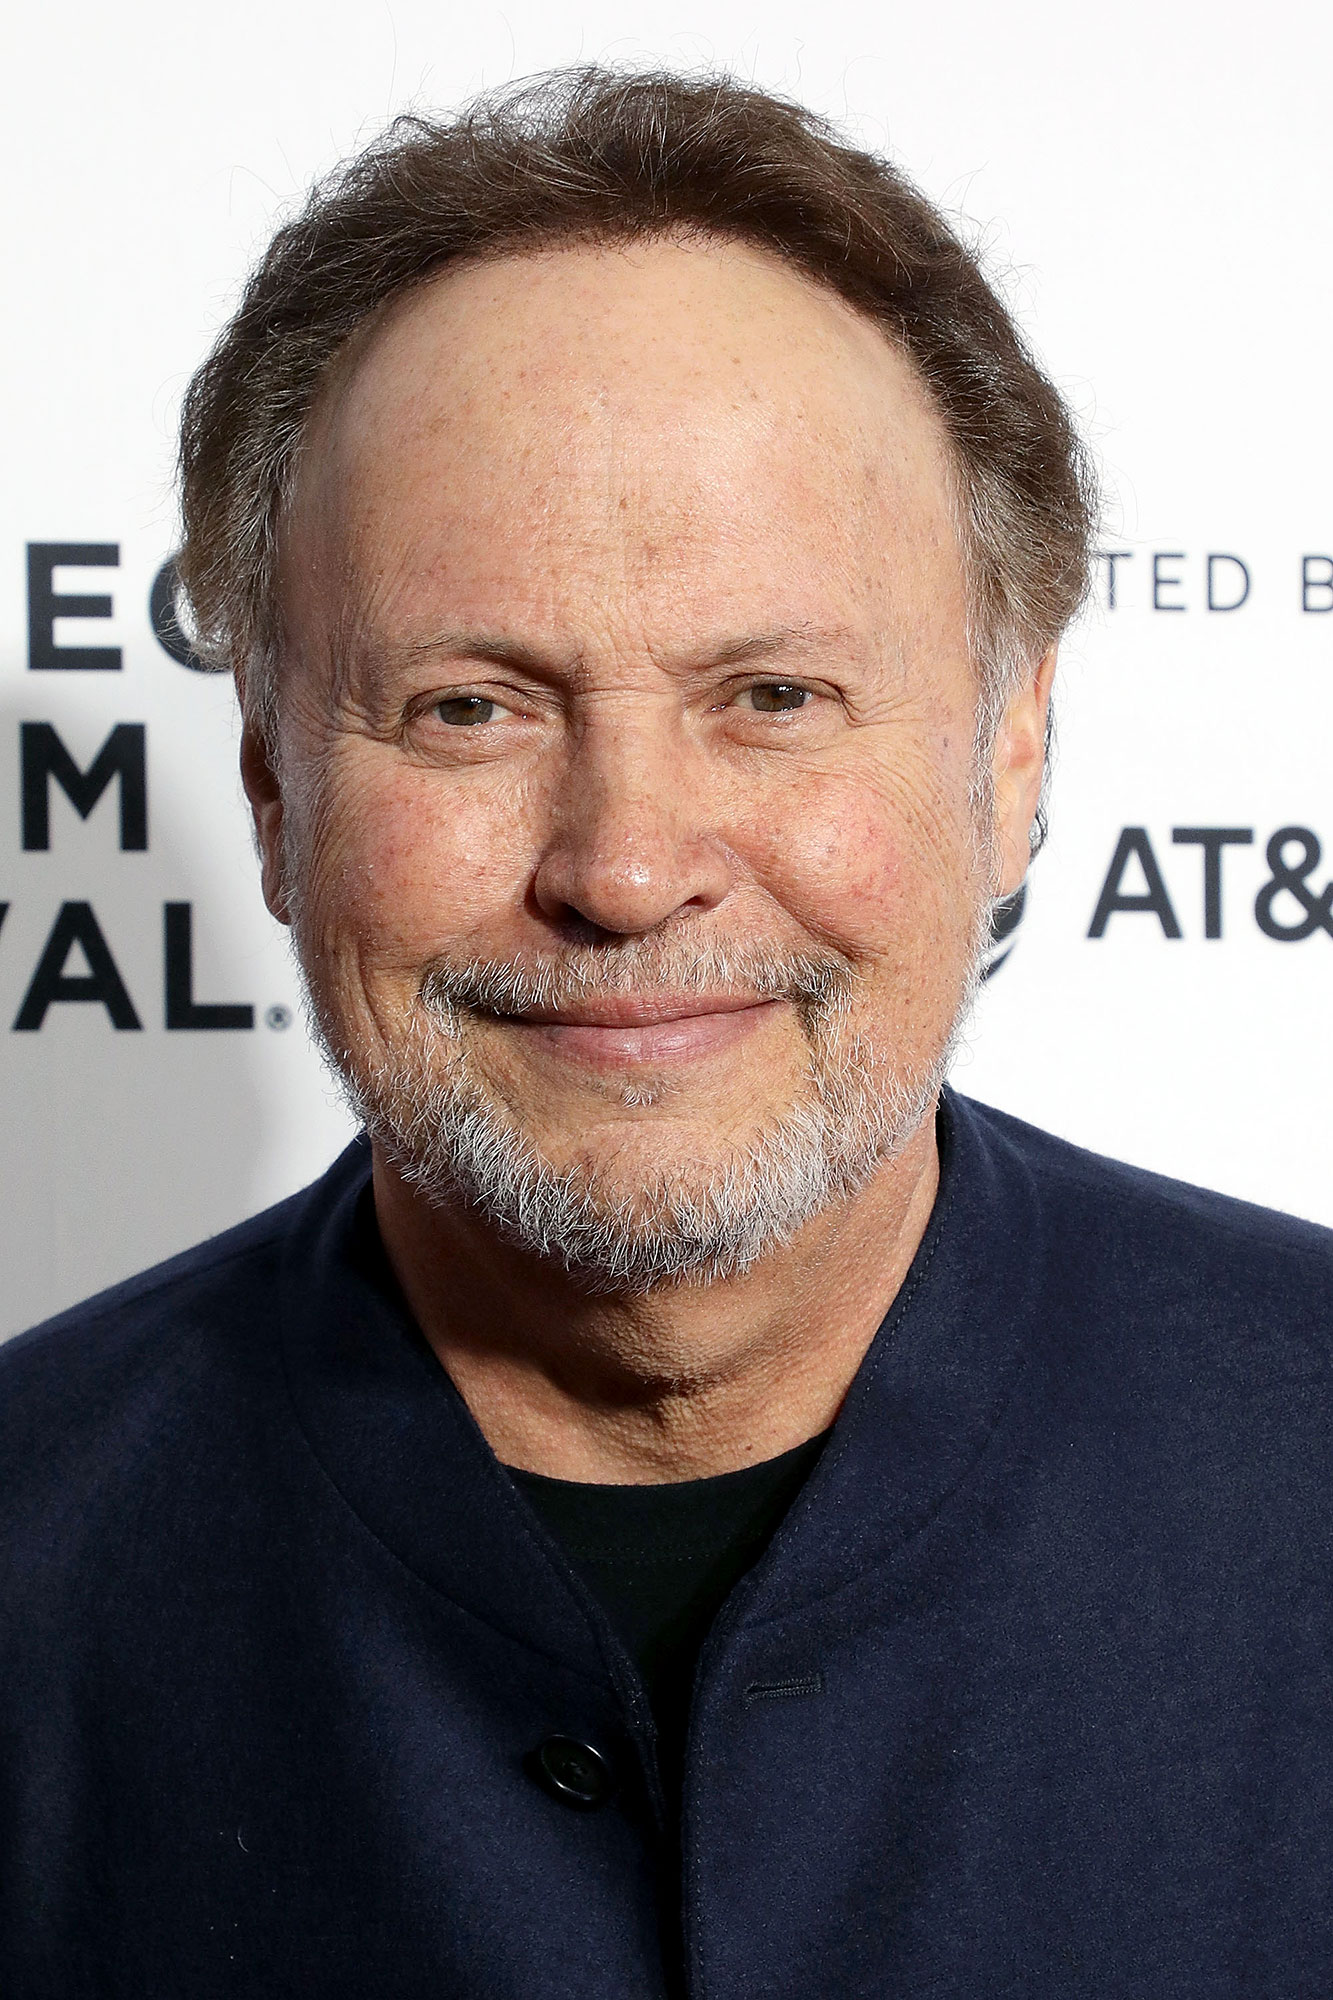 Billy Crystal Teachers Before Fame